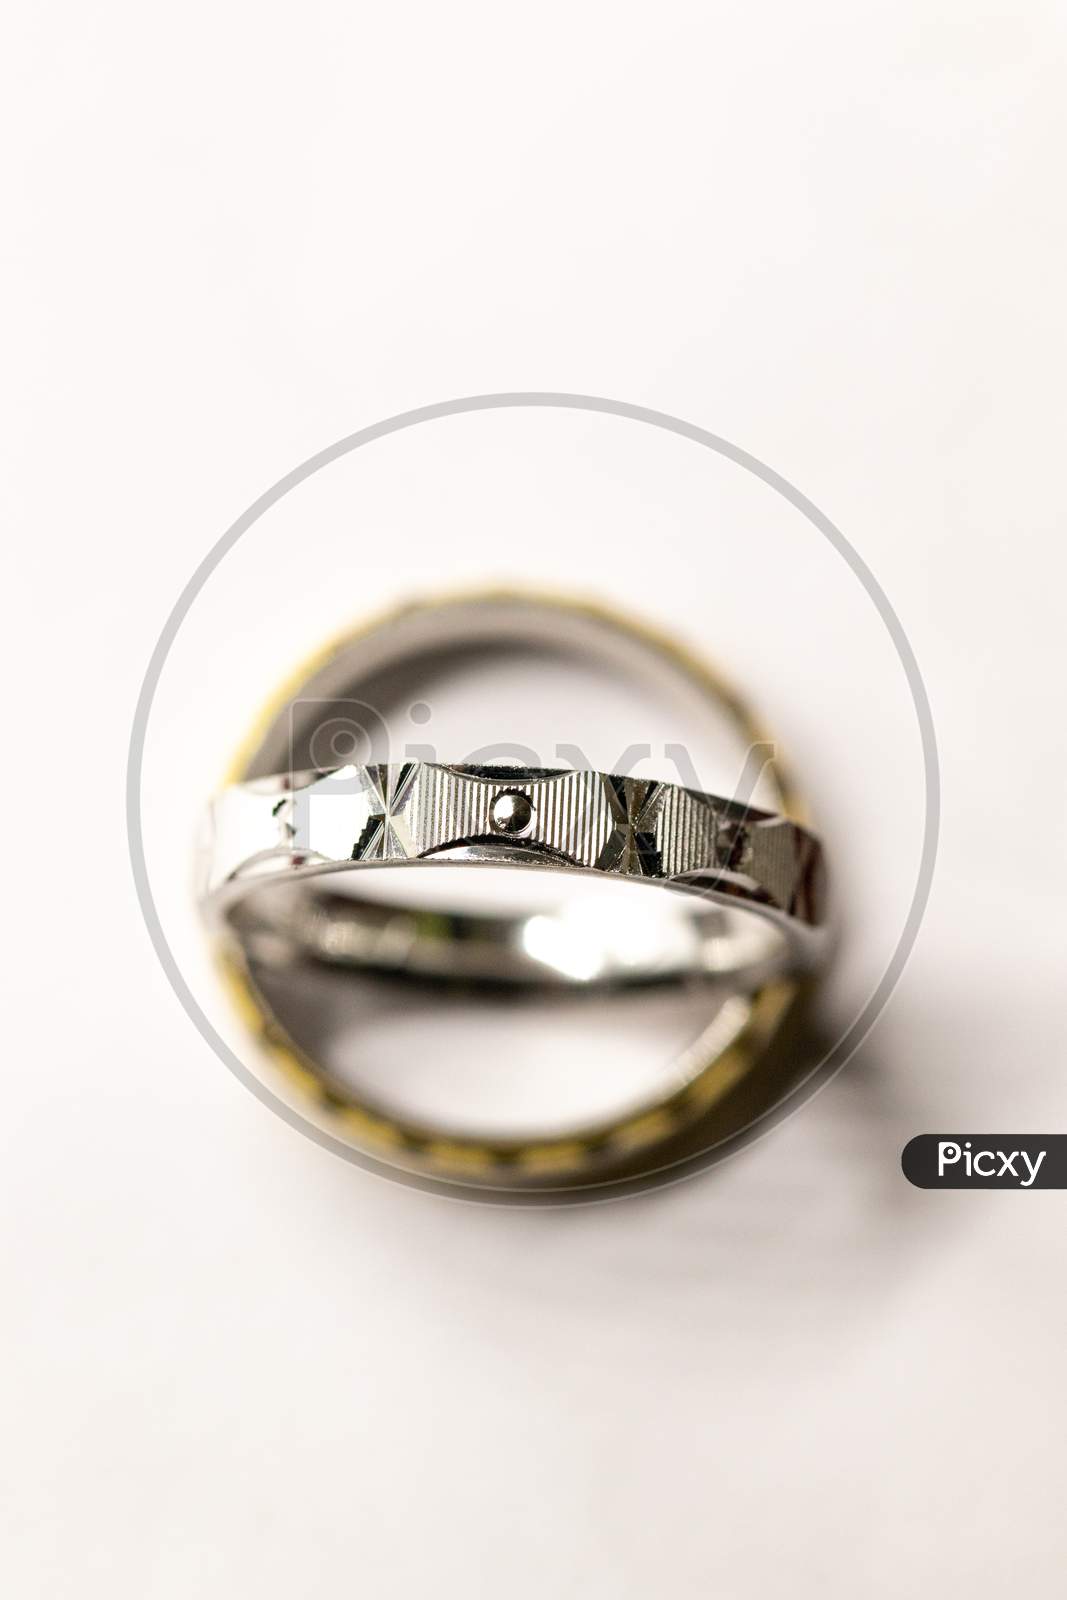 Silver Round Ring On White Background